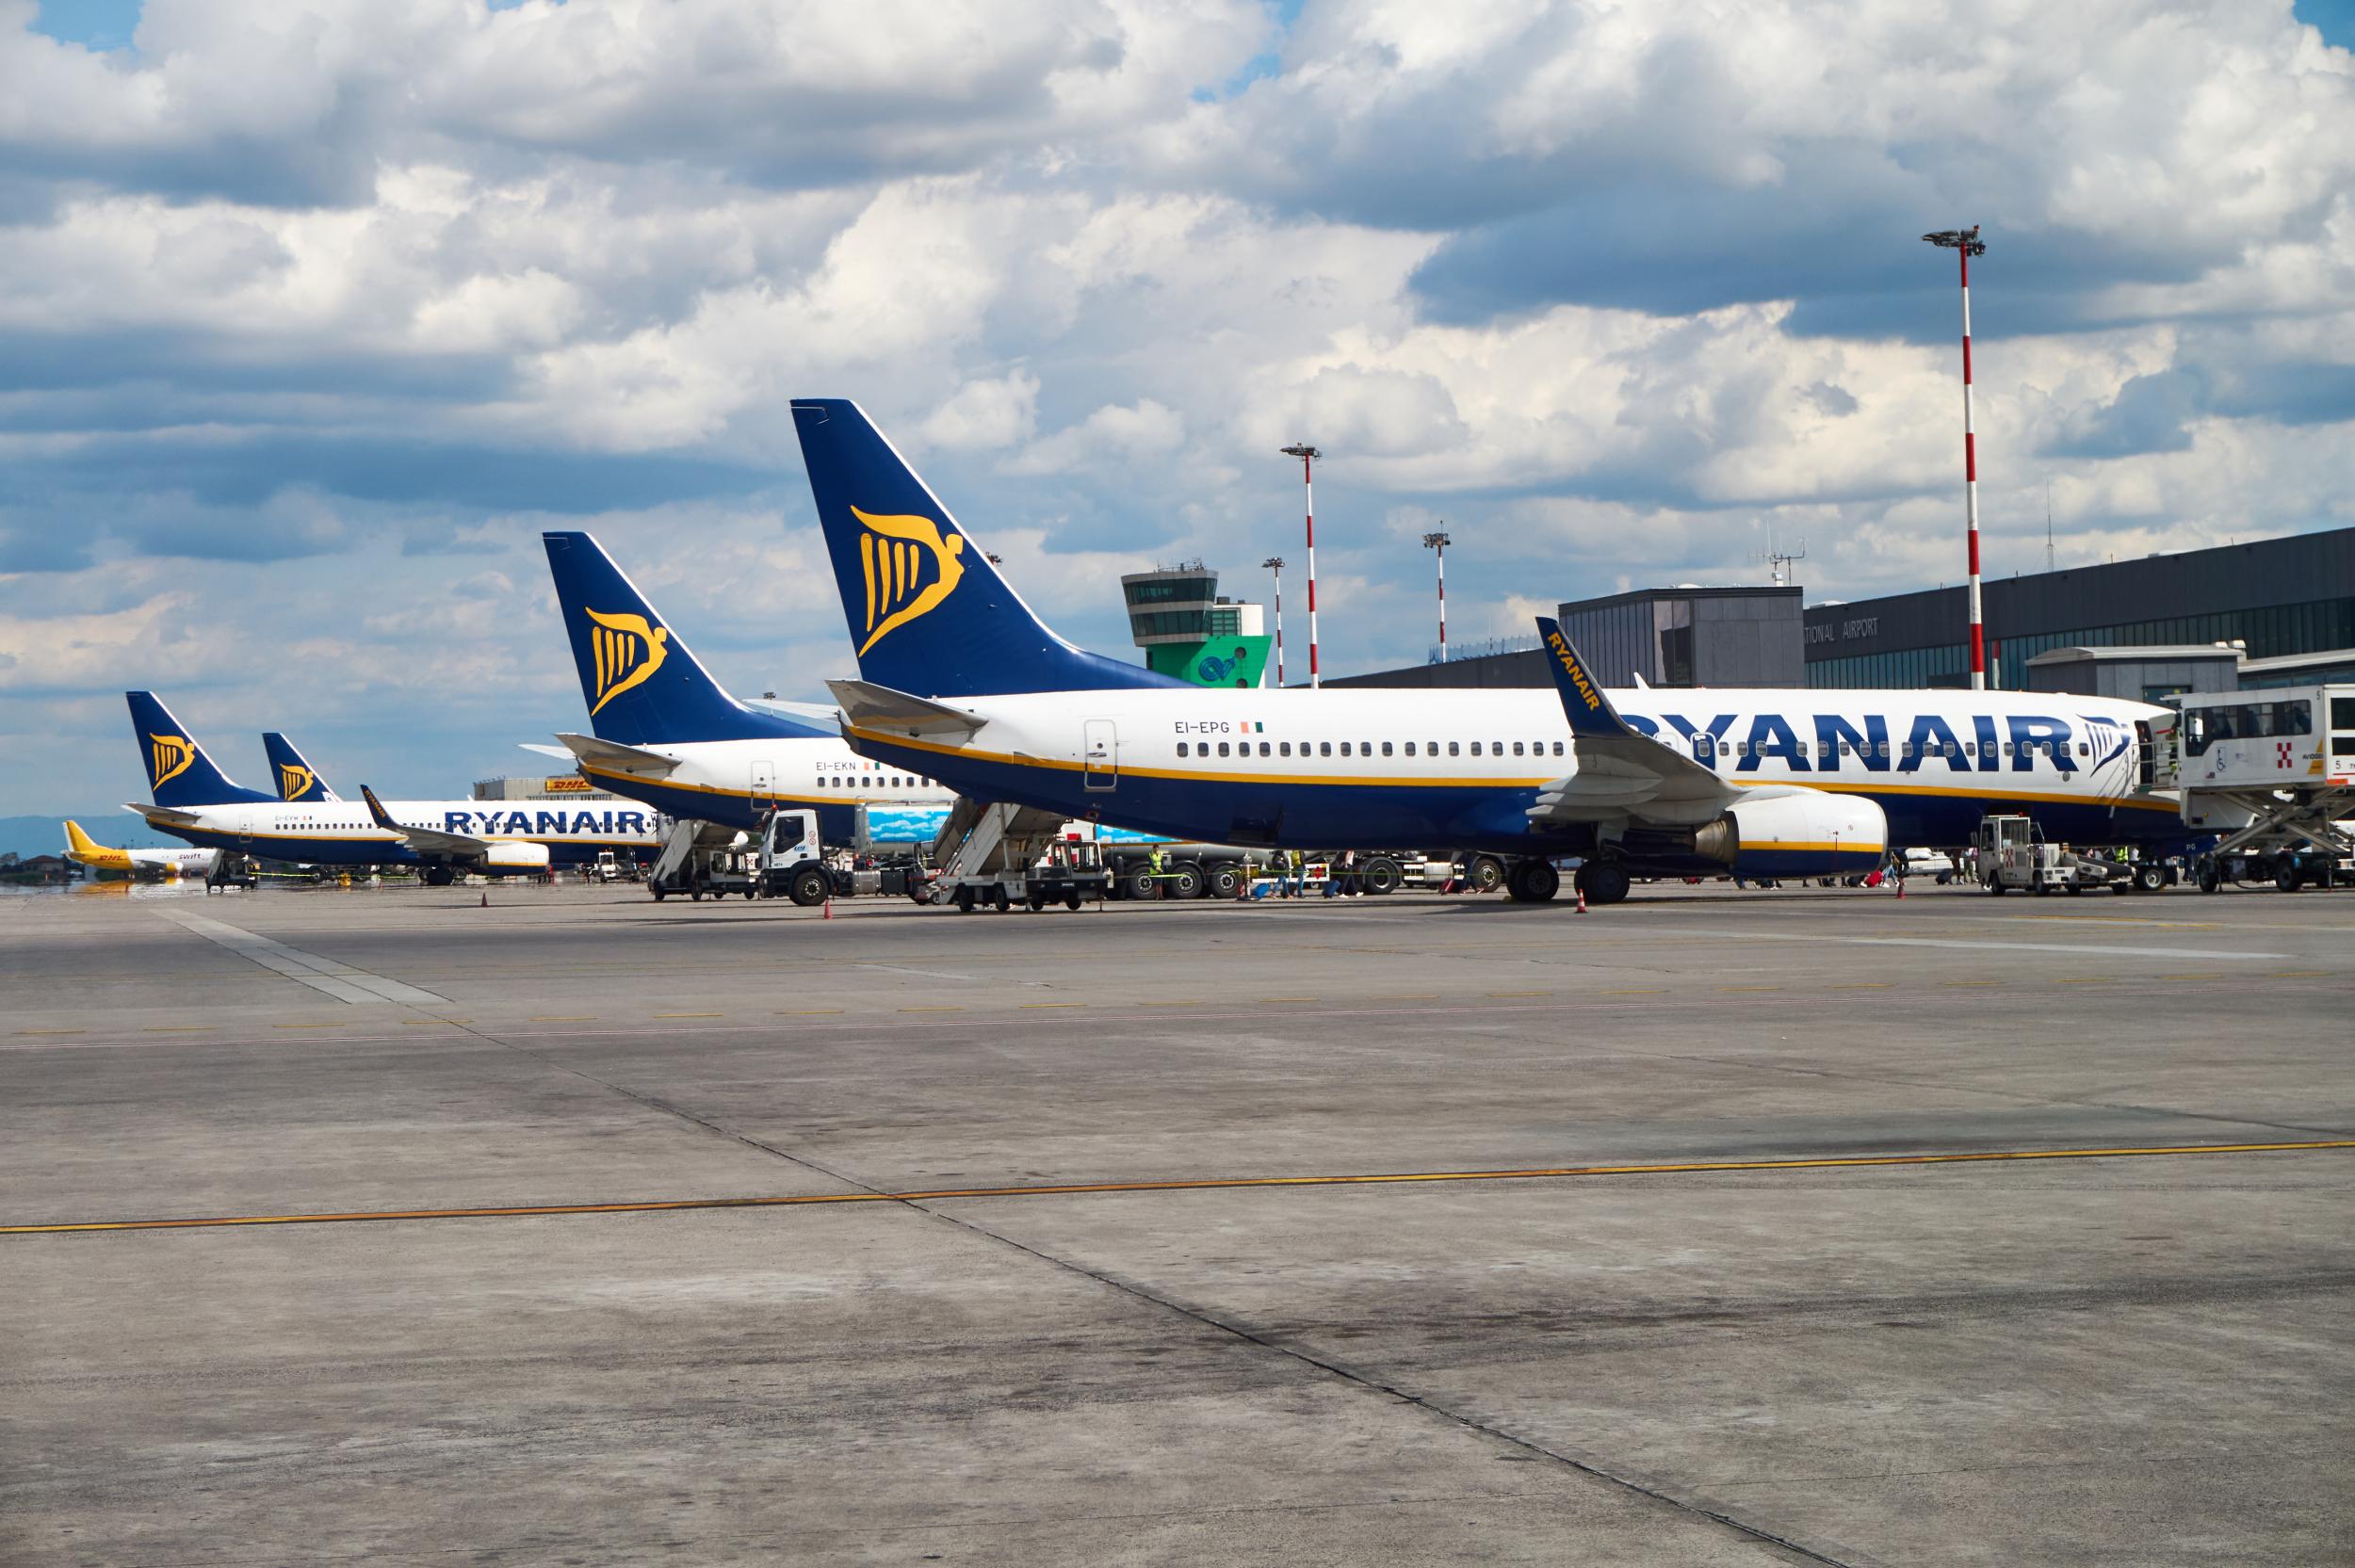 More than 210,000 Ryanair passengers were affected by cancelled flights in June 2018 alone